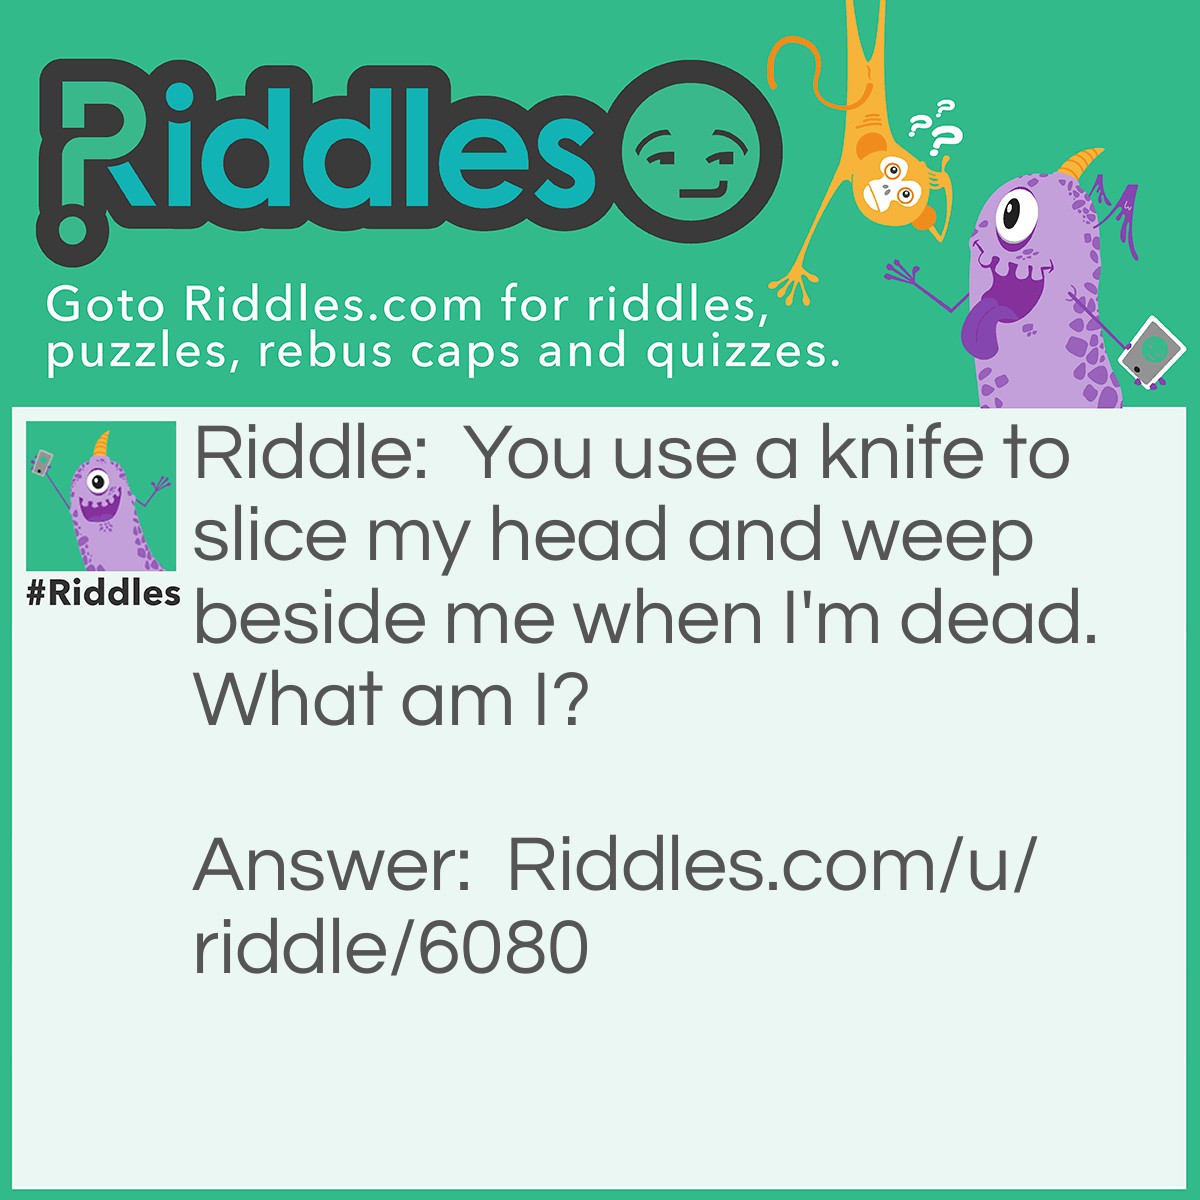 Riddle: You use a knife to slice my head and weep beside me when I'm dead. What am I? Answer: An onion.